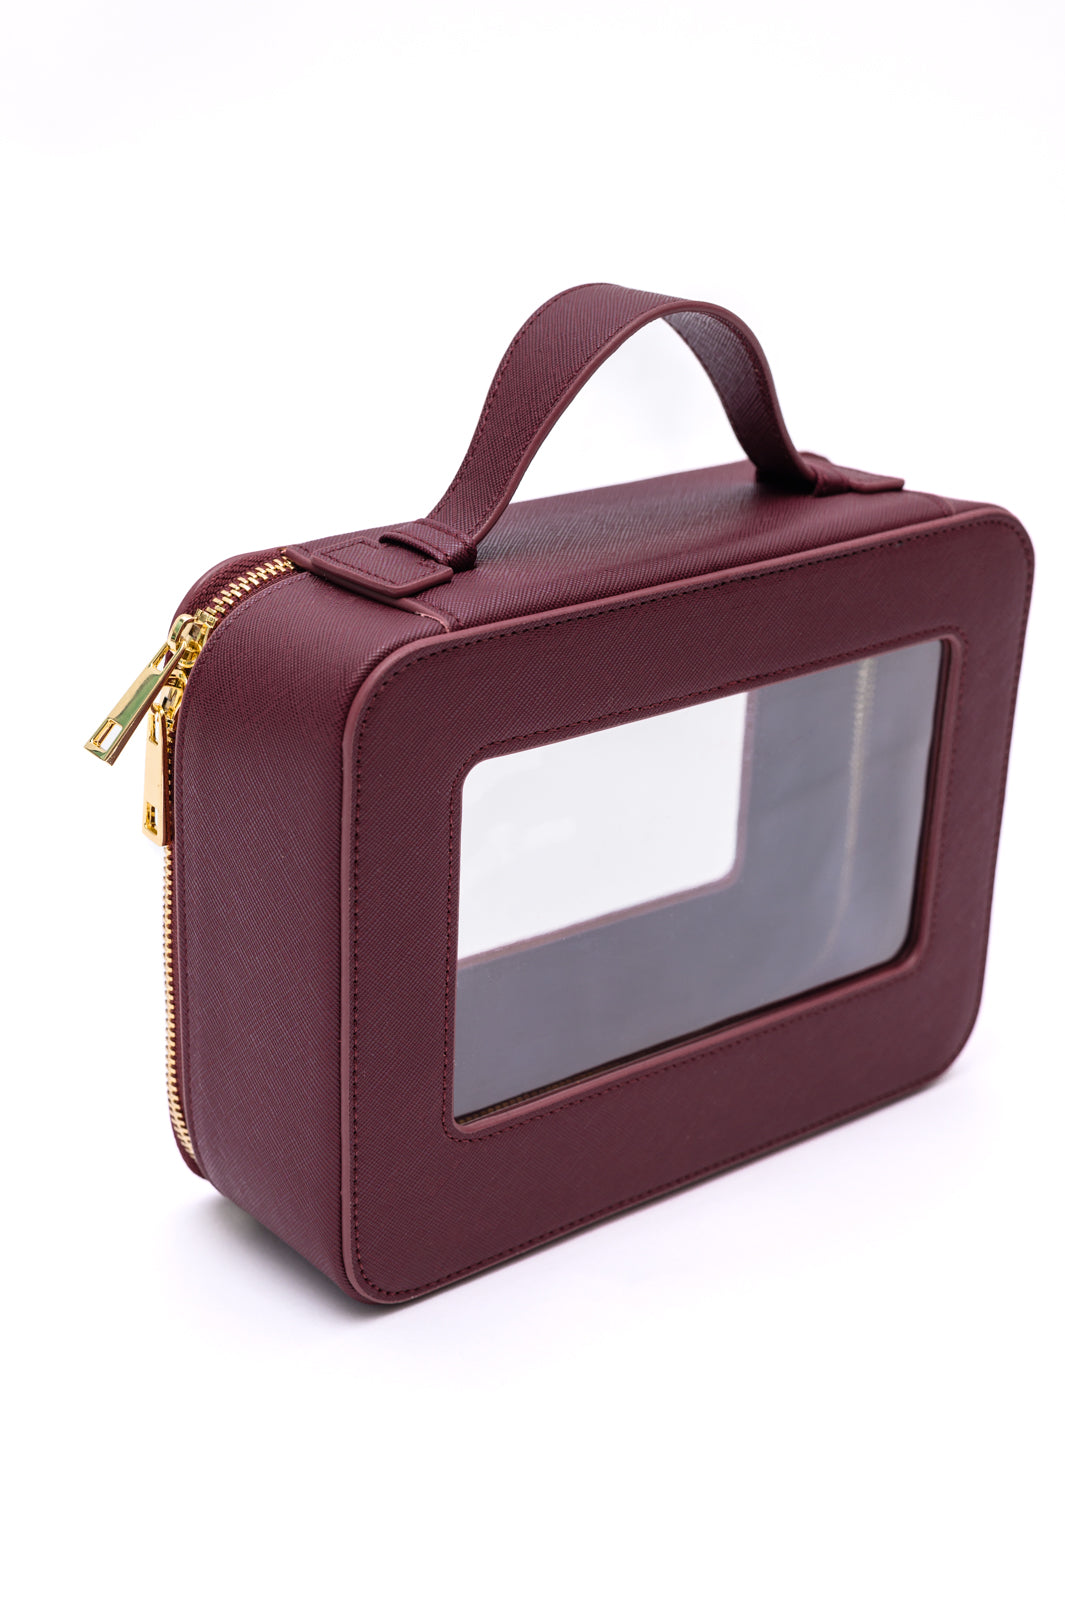 PU Leather Travel Cosmetic Case in Wine-220 Beauty/Gift-Inspired by Justeen-Women's Clothing Boutique in Chicago, Illinois